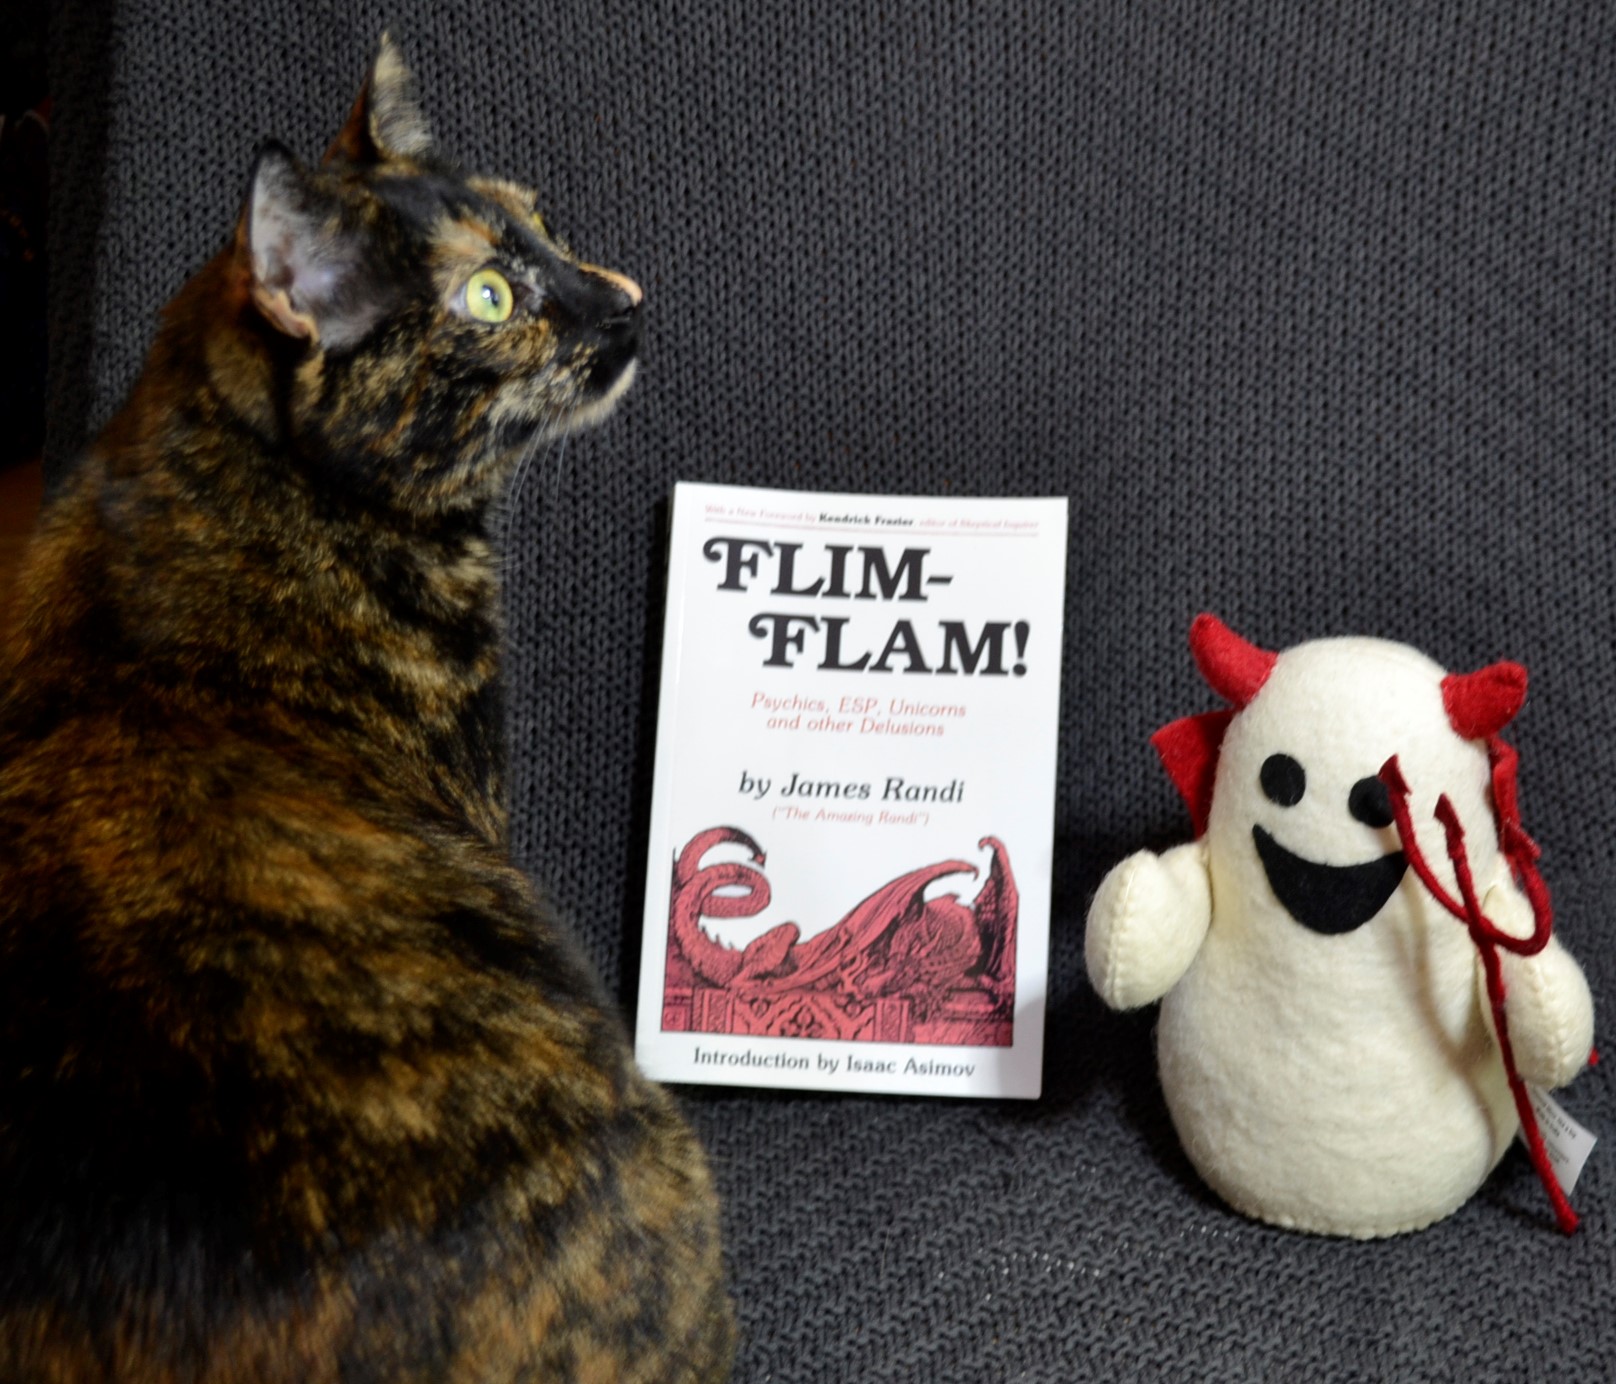 A tortoiseshell cat looks up innocently. Beside her is a stuffed ghost dressed as a devil and a book.